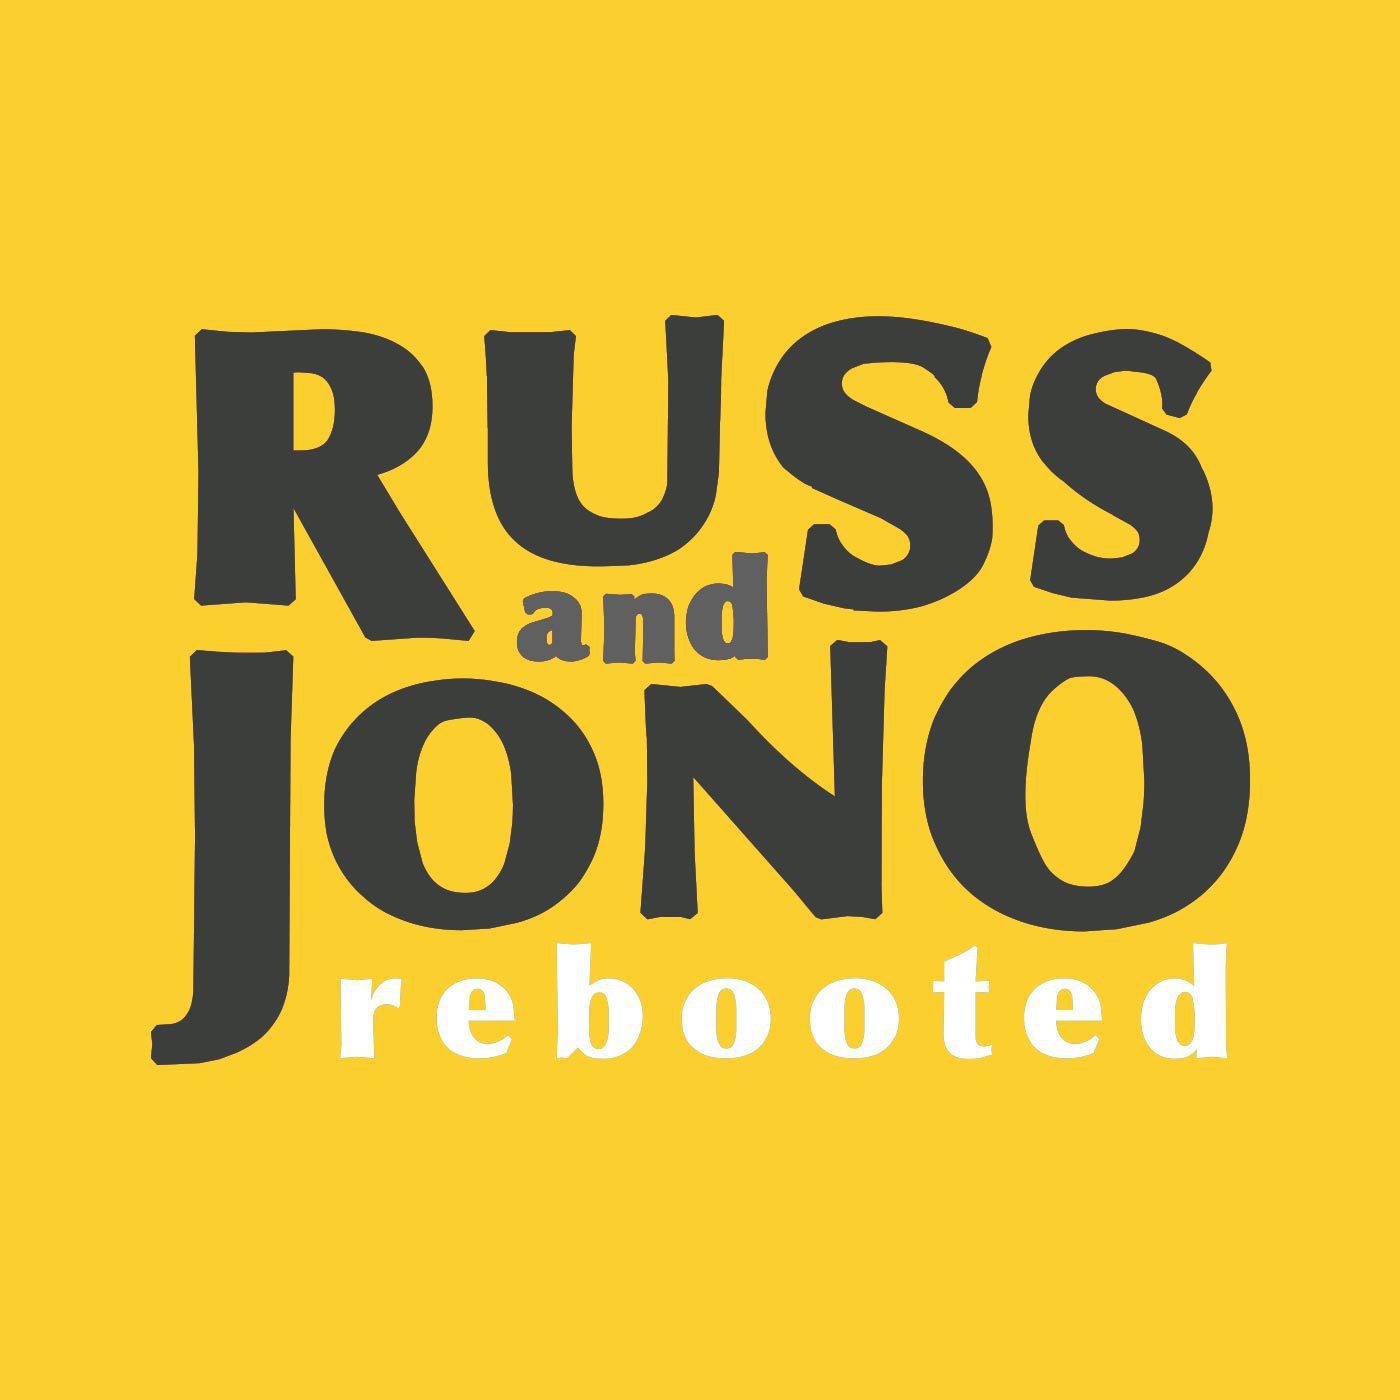 S1 Ep6: Russ and Jono Rebooted - 2 - Thank You Very Much Indeed!